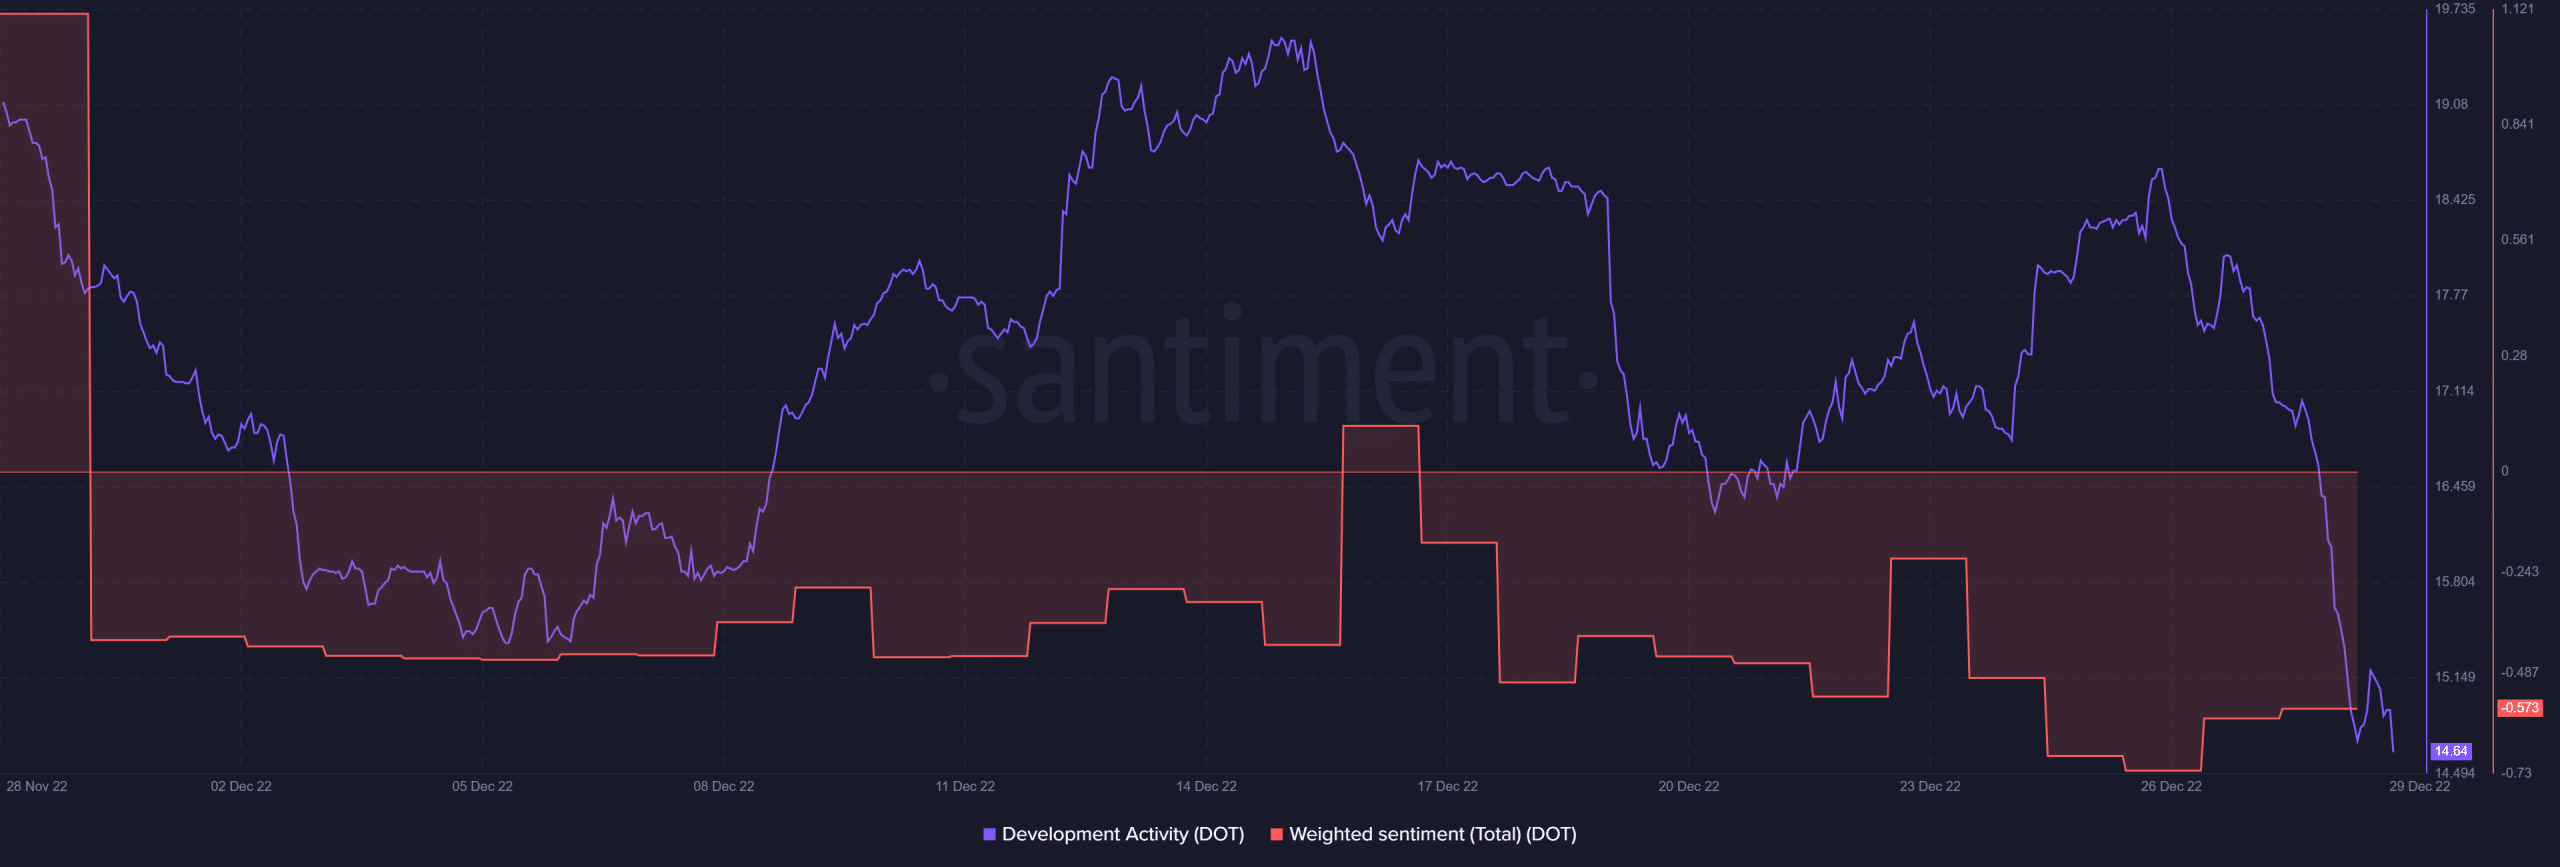 Polkadot development activity and weighted sentiment